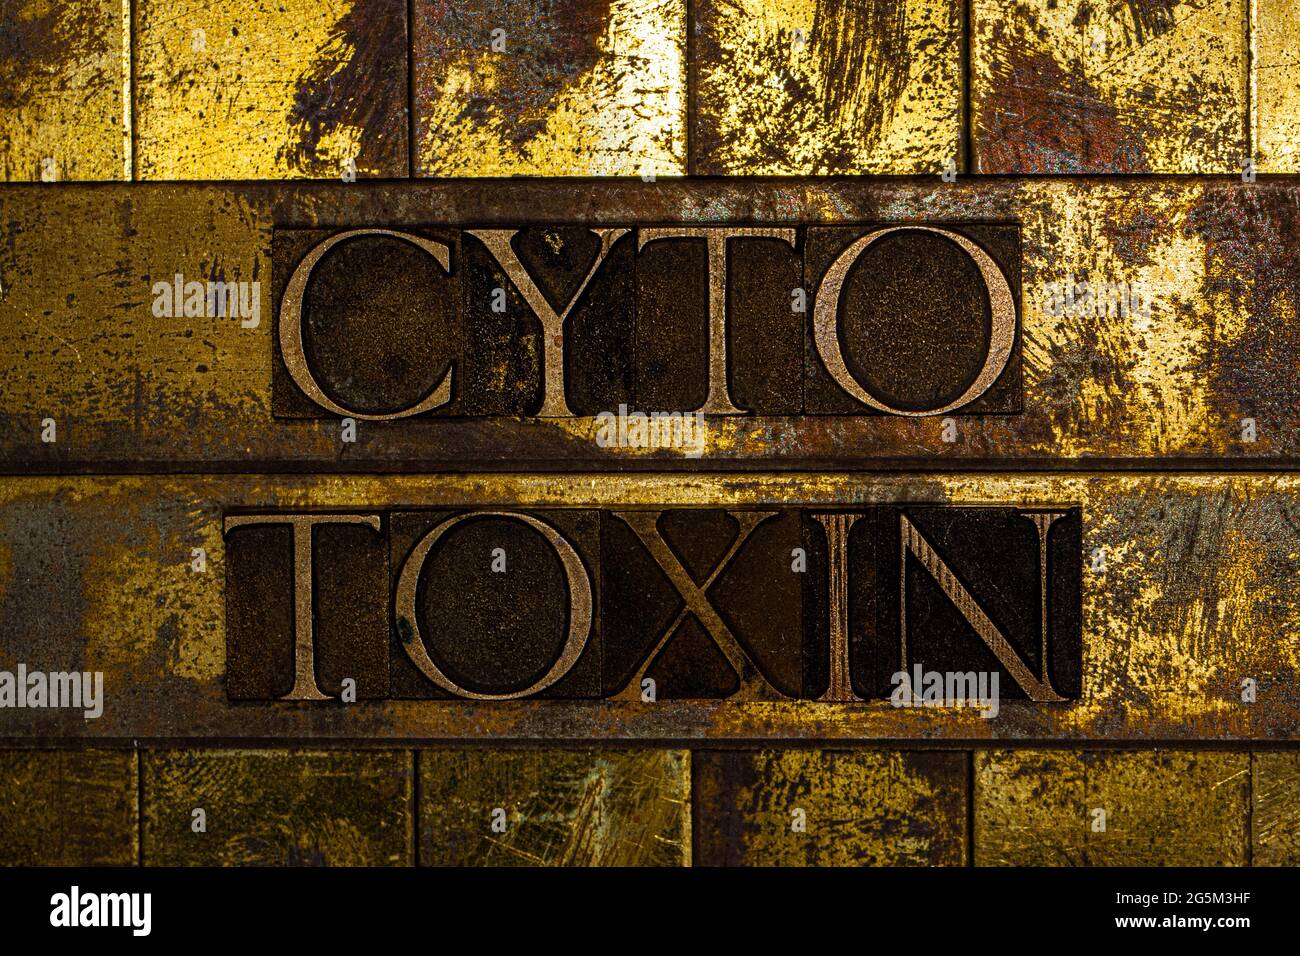 Cytotoxin text on vintage textured grunge copper and gold background Stock Photo